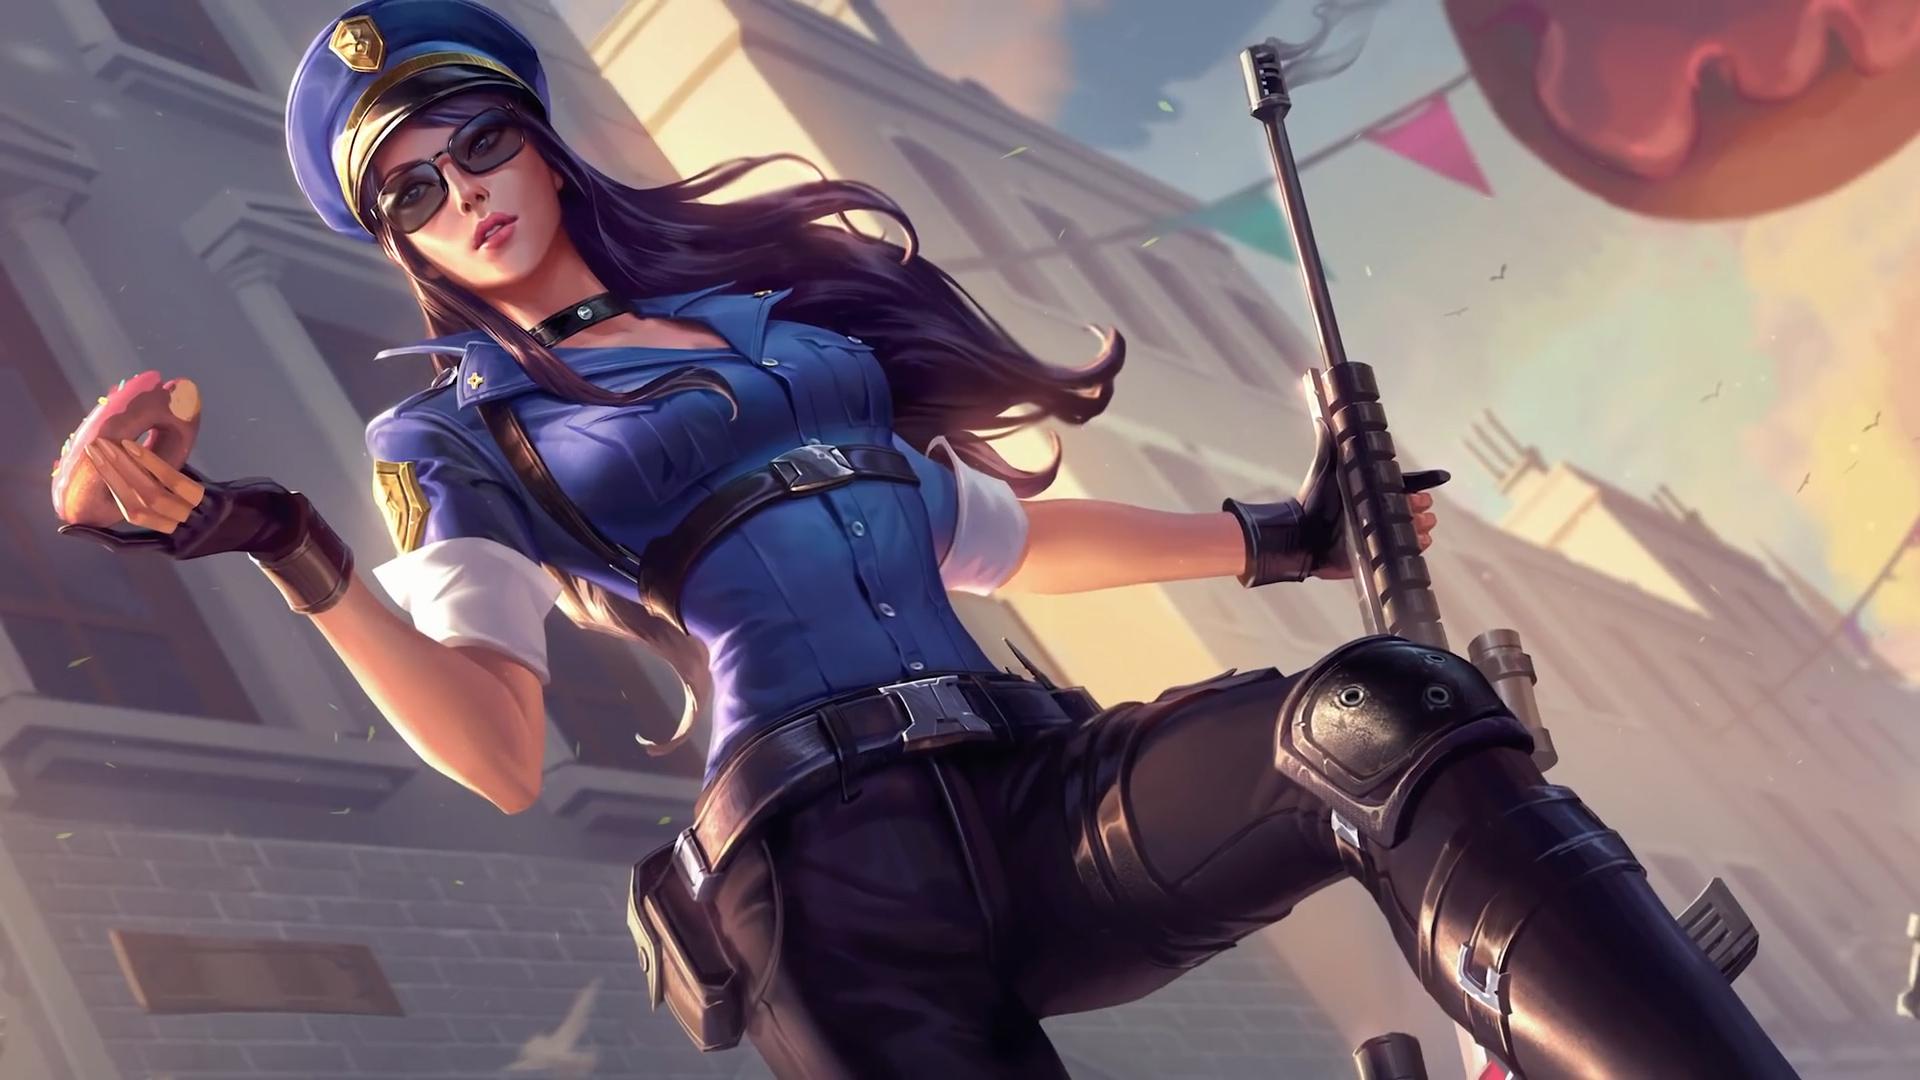 Riot releases the classic theme song Caitlyn, reorients the visuals with revamped splash arts